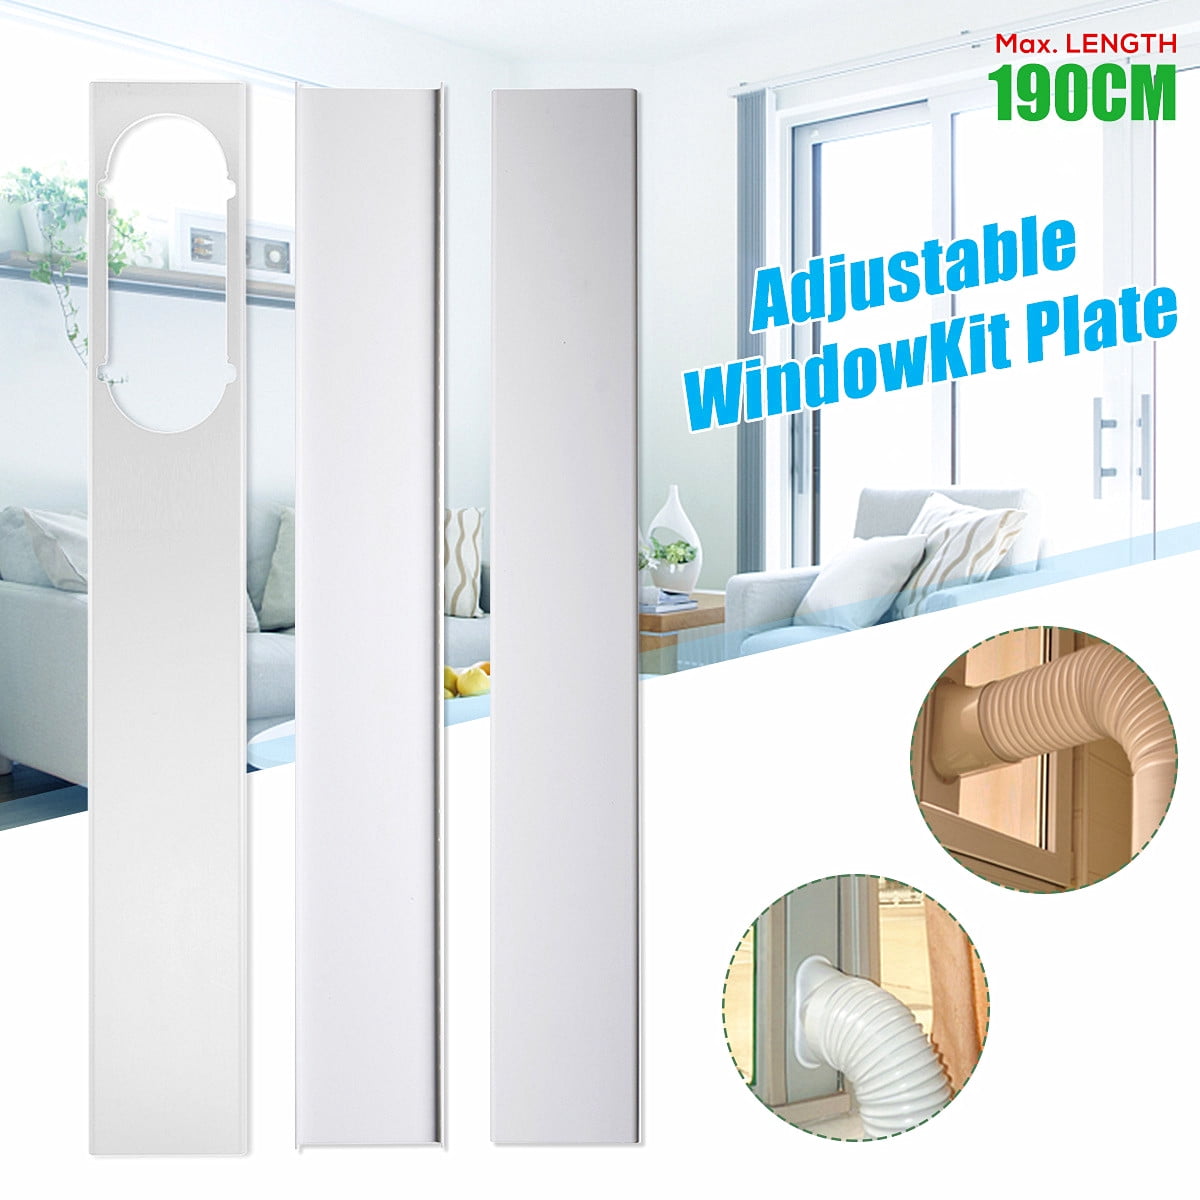 2/3pcs Adjustable Window Slide Kit Plate Air Conditioner Wind Shield Portable A+